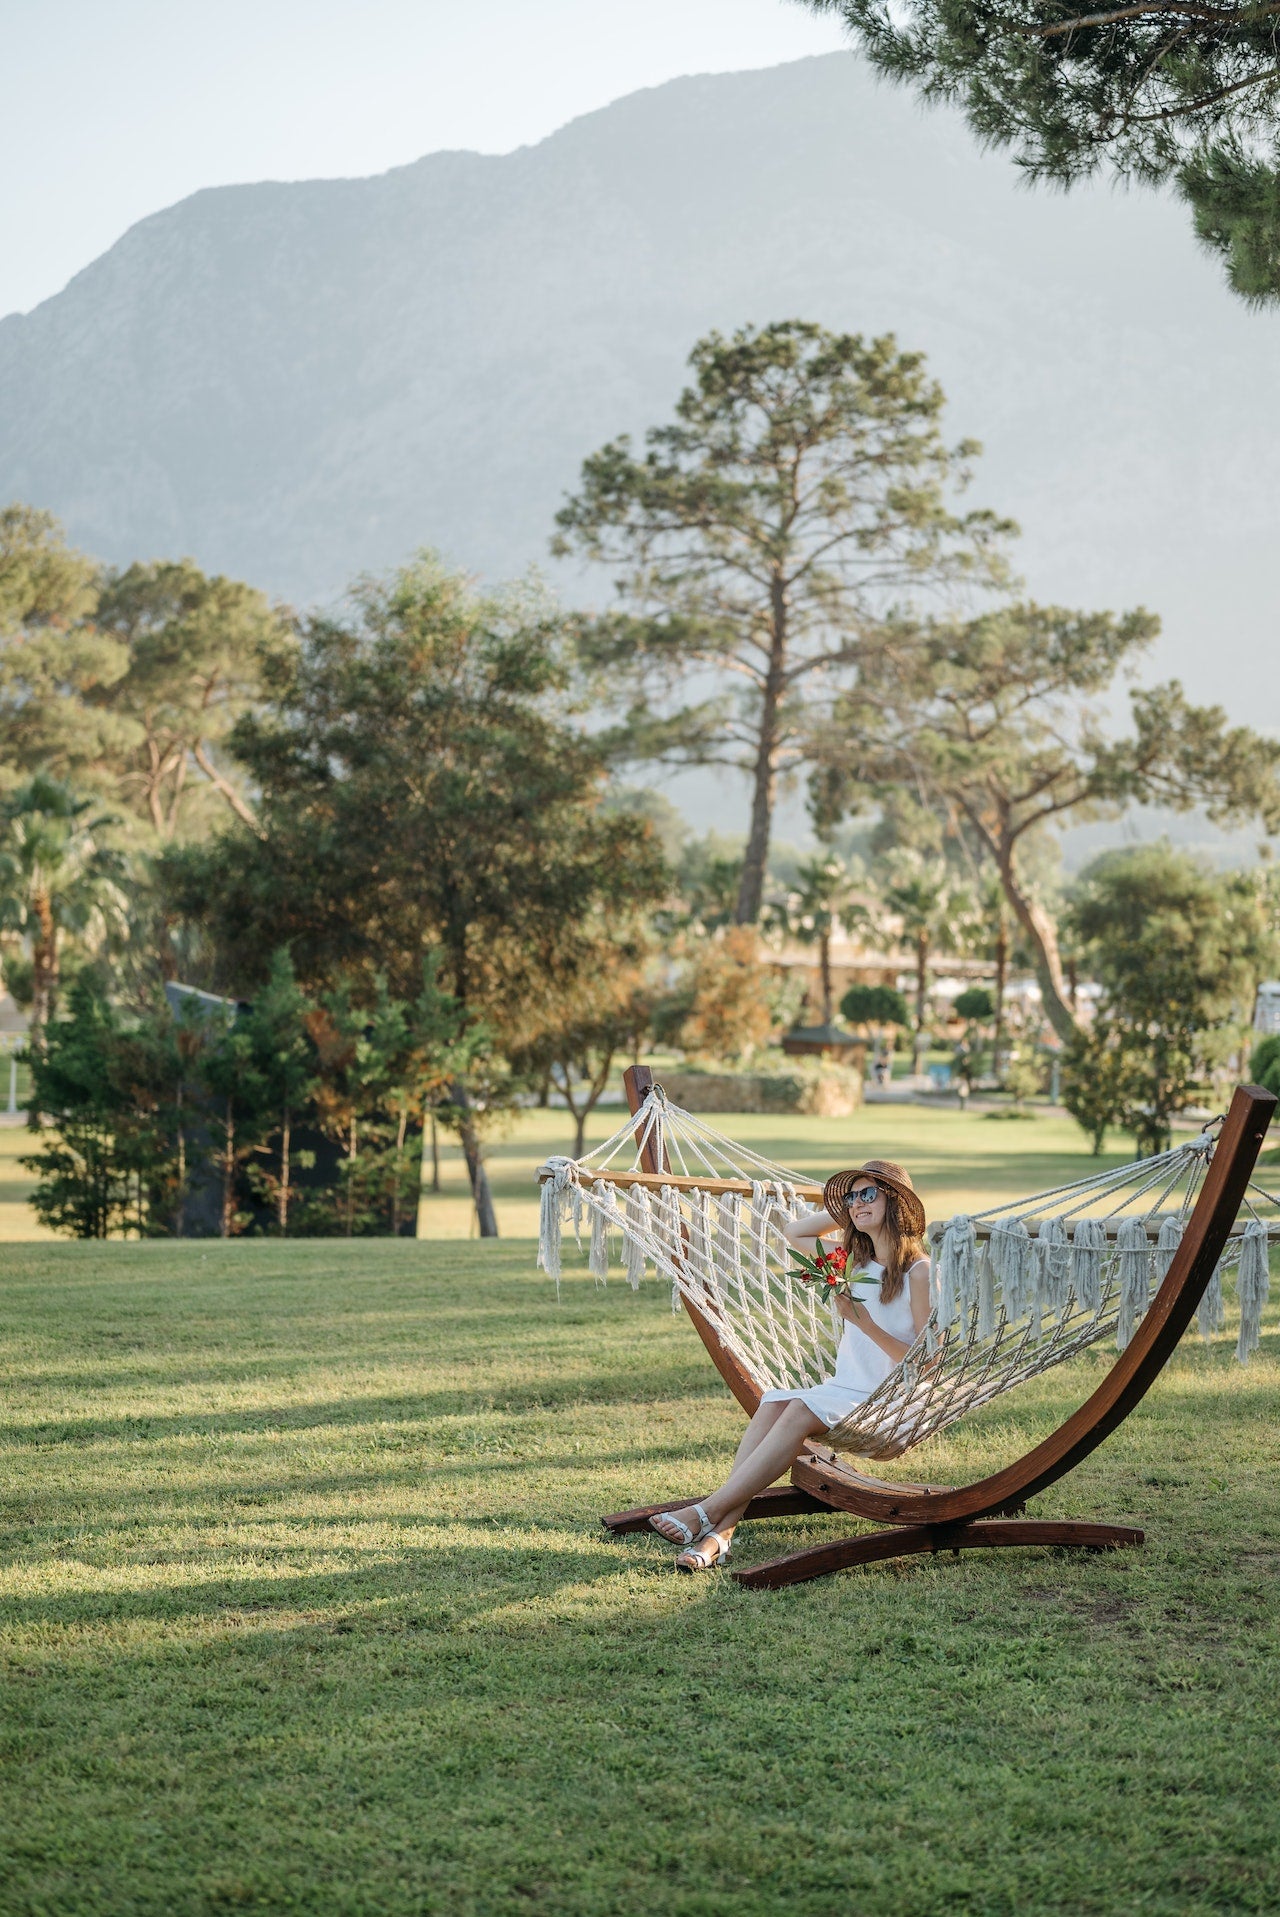 Woman in White Dress With Hat Sitting on Hammock on Grass Field